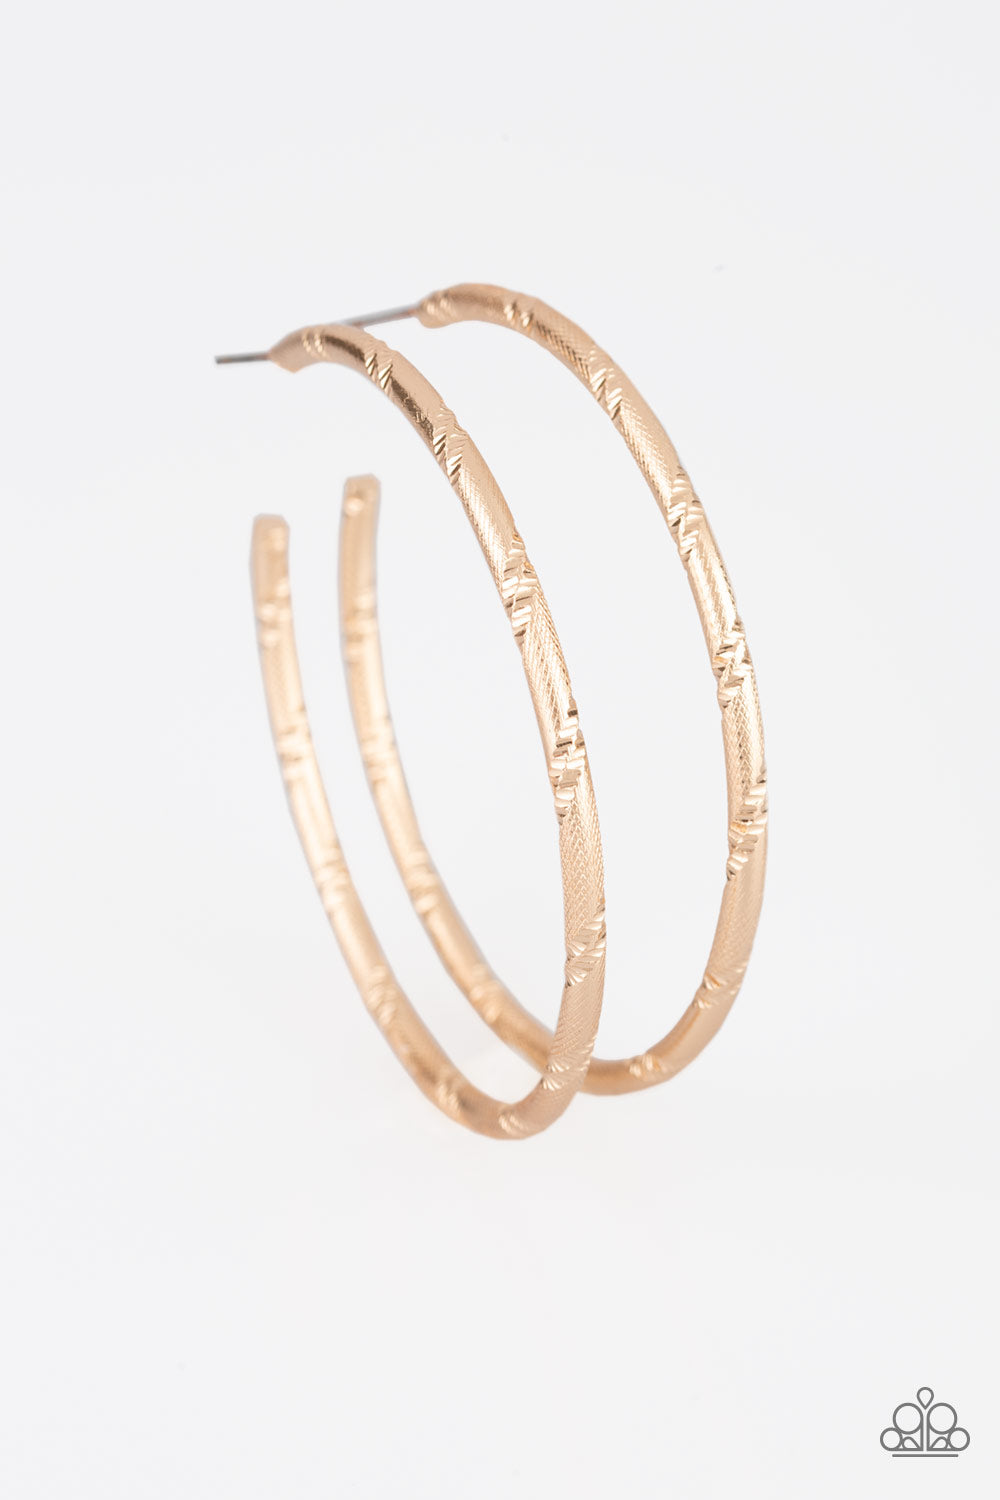 Etched in ribbons of diamond-cut shimmer, a shiny gold hoop curls around the ear for a classic look. Earring attaches to a standard post fitting. Hoop measures 2 1/4" in diameter.